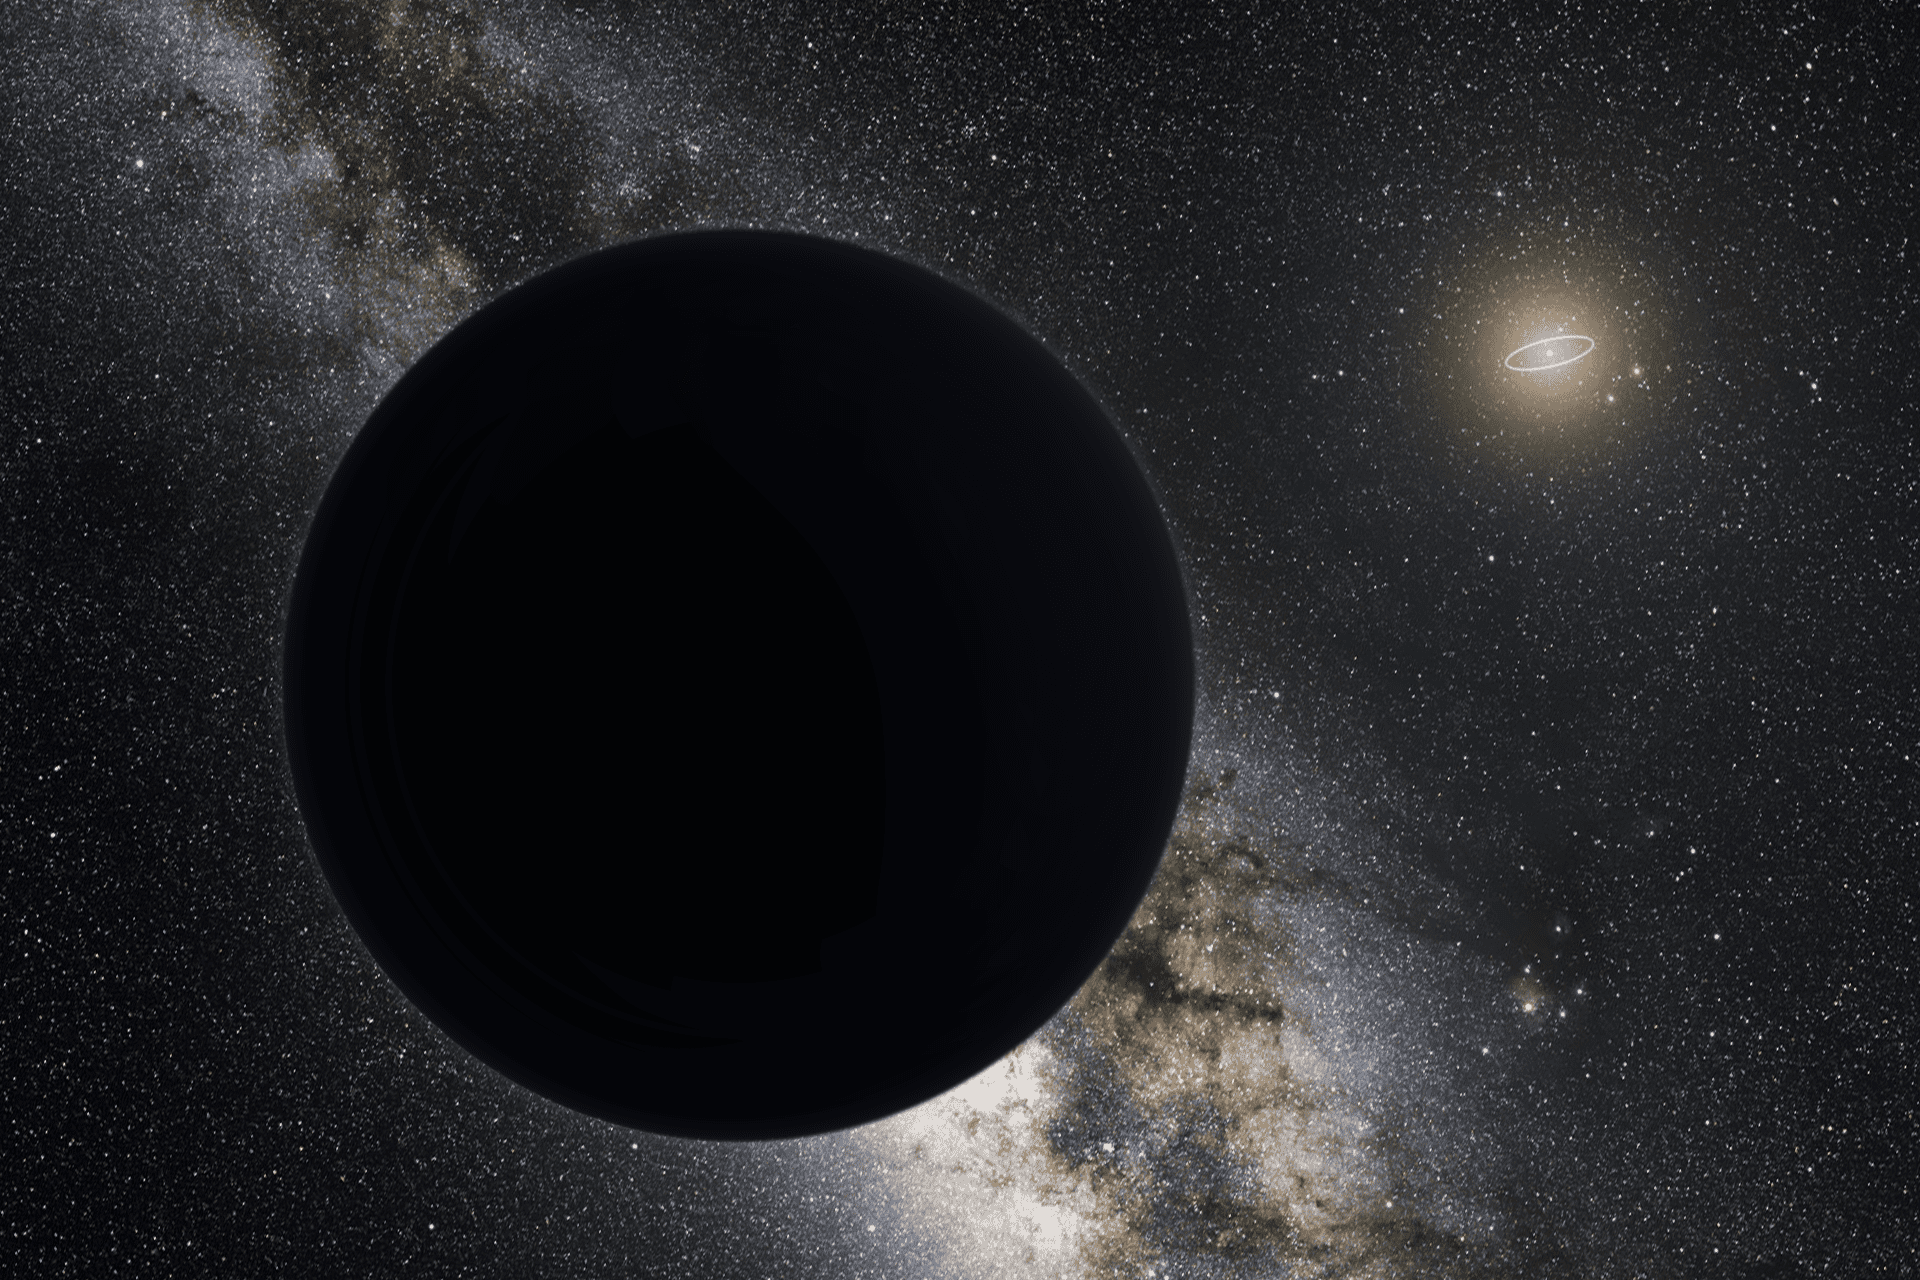 Artist impression of the hypothetical 'Planet 9'. Credit: Wikimedia Commons.